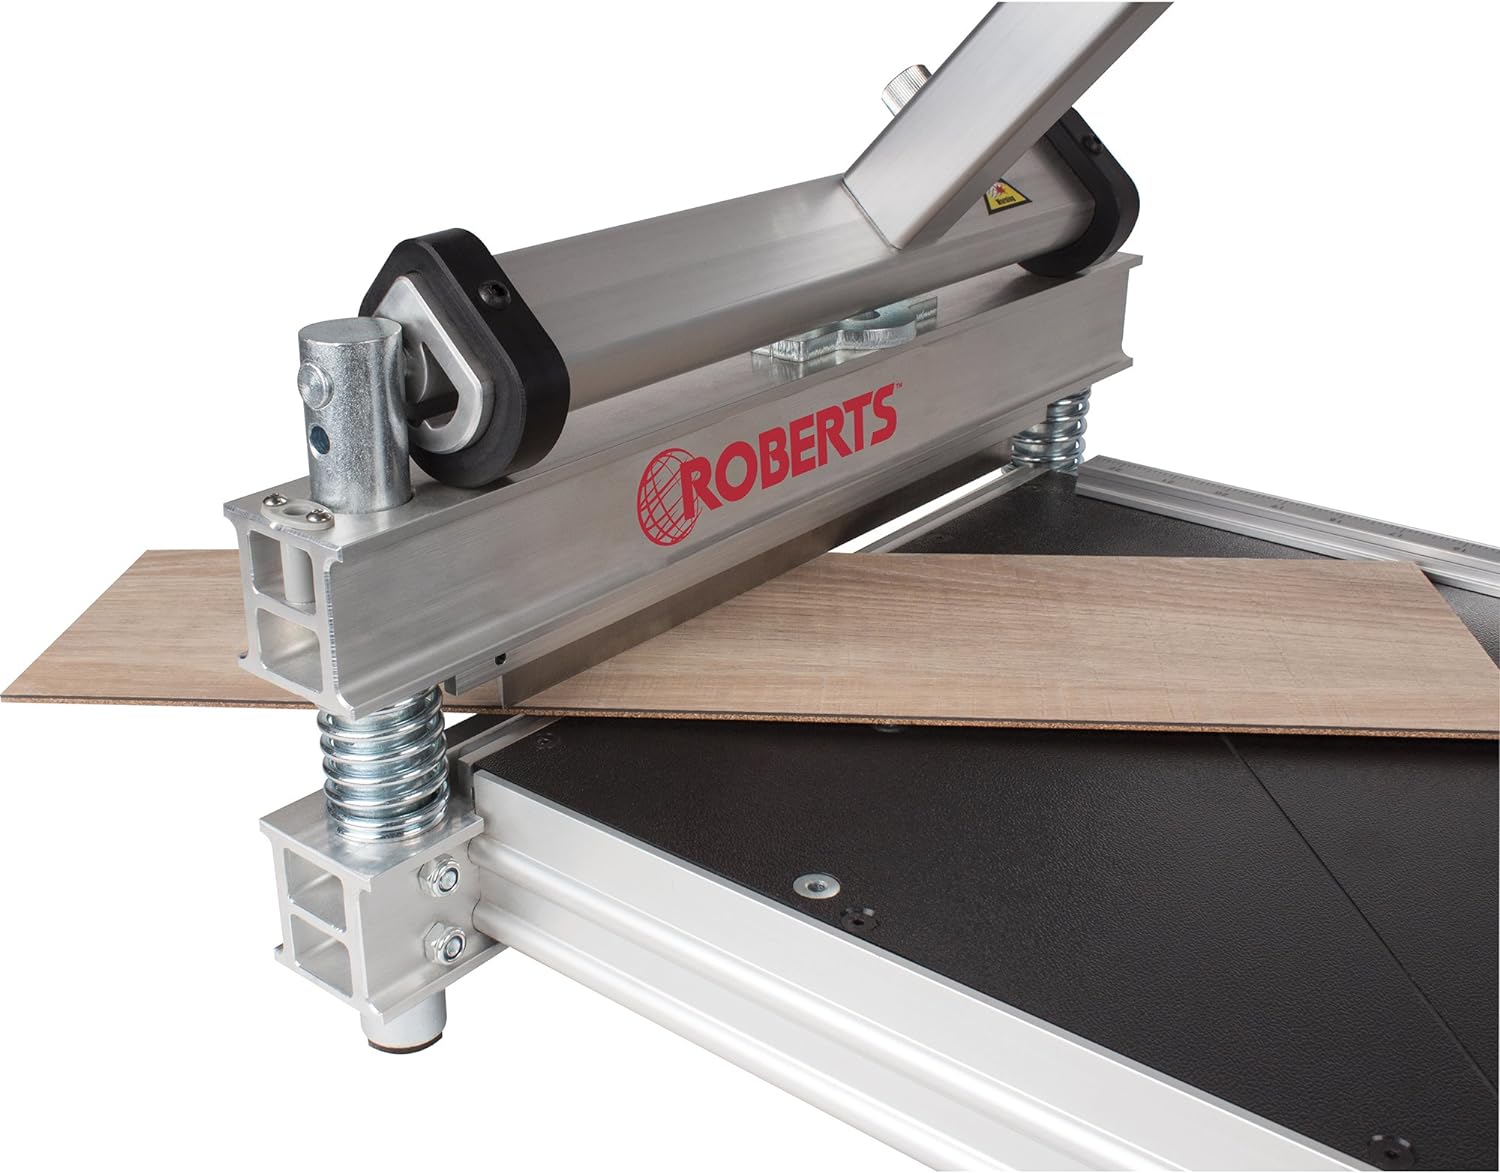 Roberts 10-94 Cutting Style: Guillotine-style